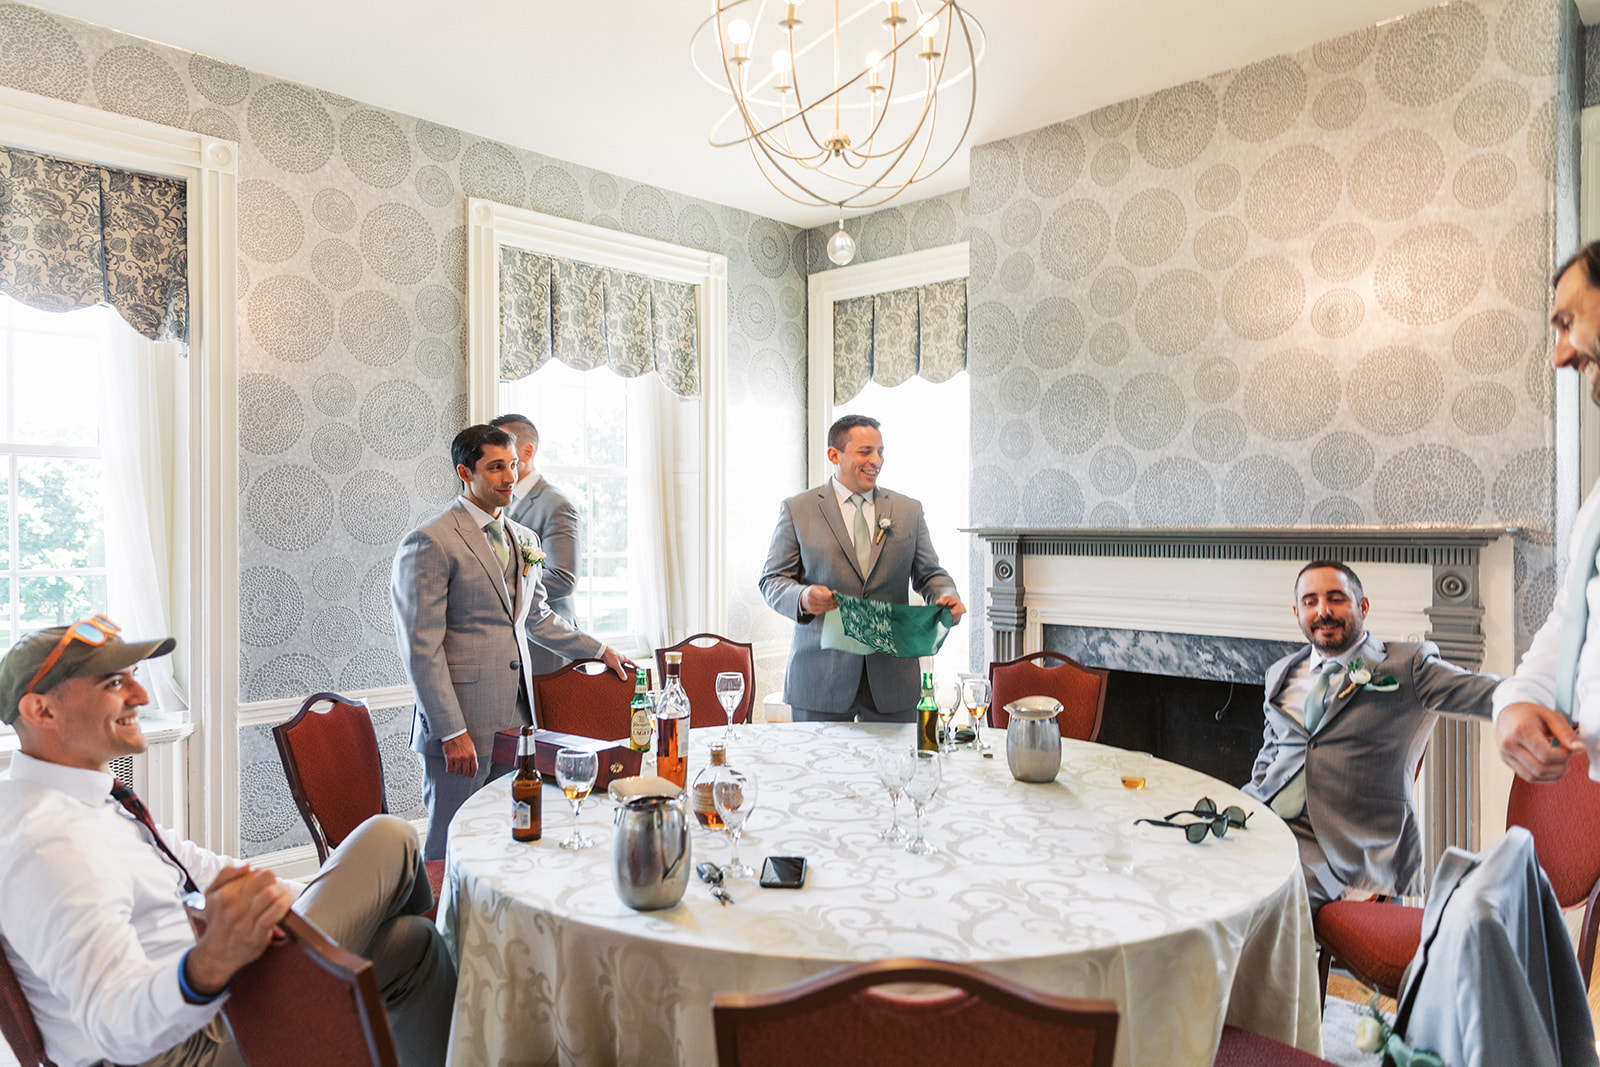 A groom gets ready with his groomsmen in grey suits